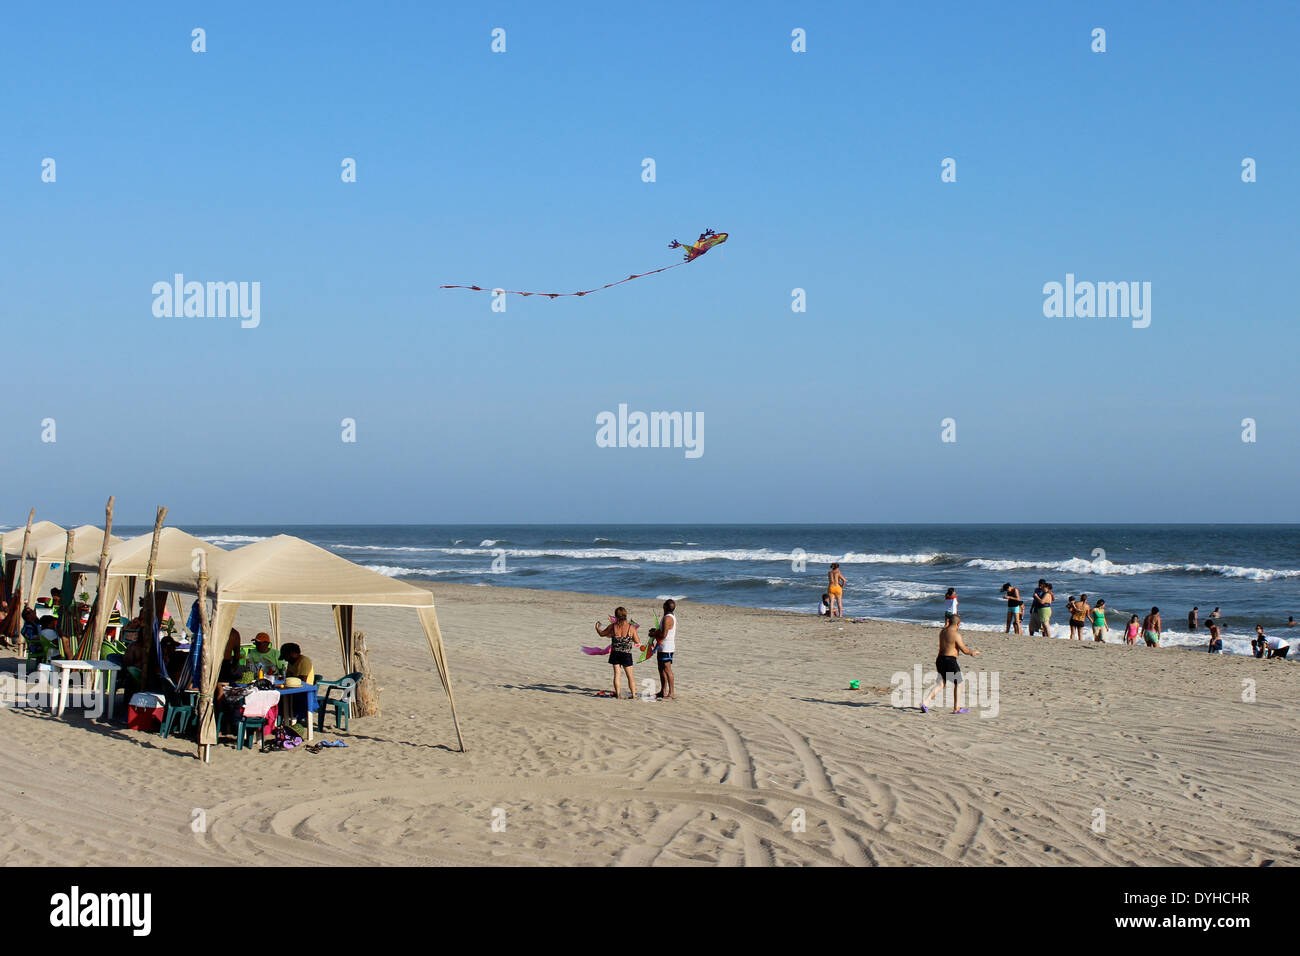 People on the beach flying a kite at Barra Vieja, Acapulco, Mexico Stock Photo